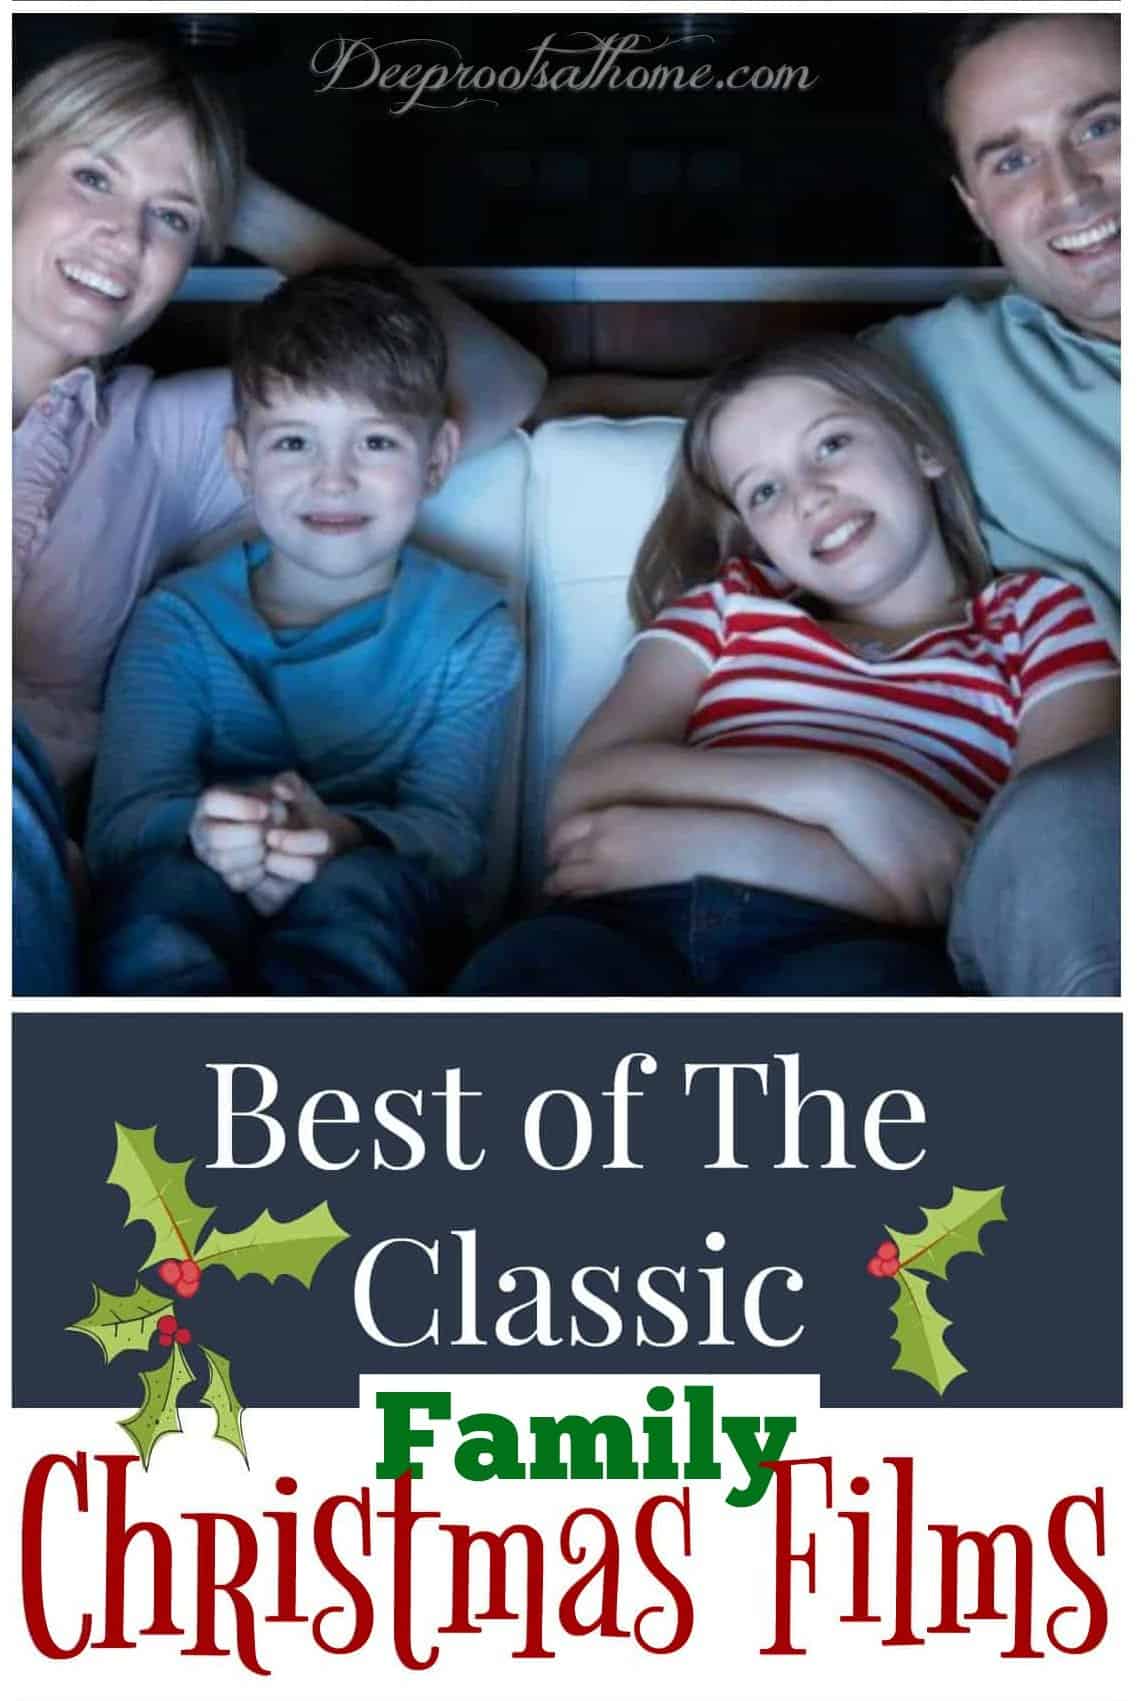 37 of the Best Classic Christmas Films For Families. A family movie night